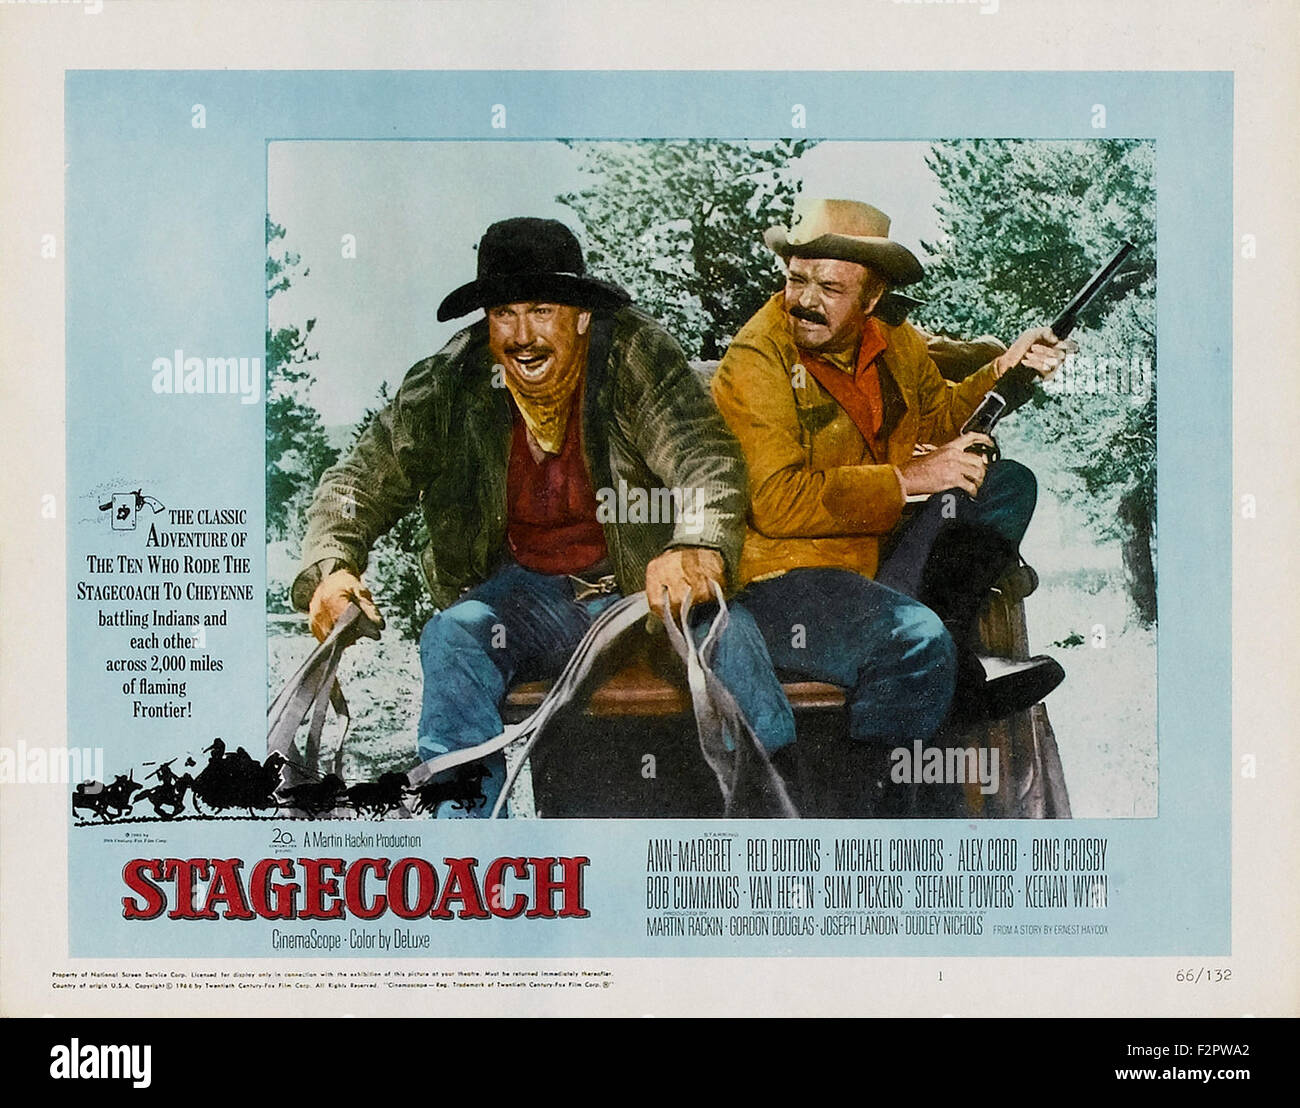 Stagecoach (1966) - Movie Poster Stock Photo